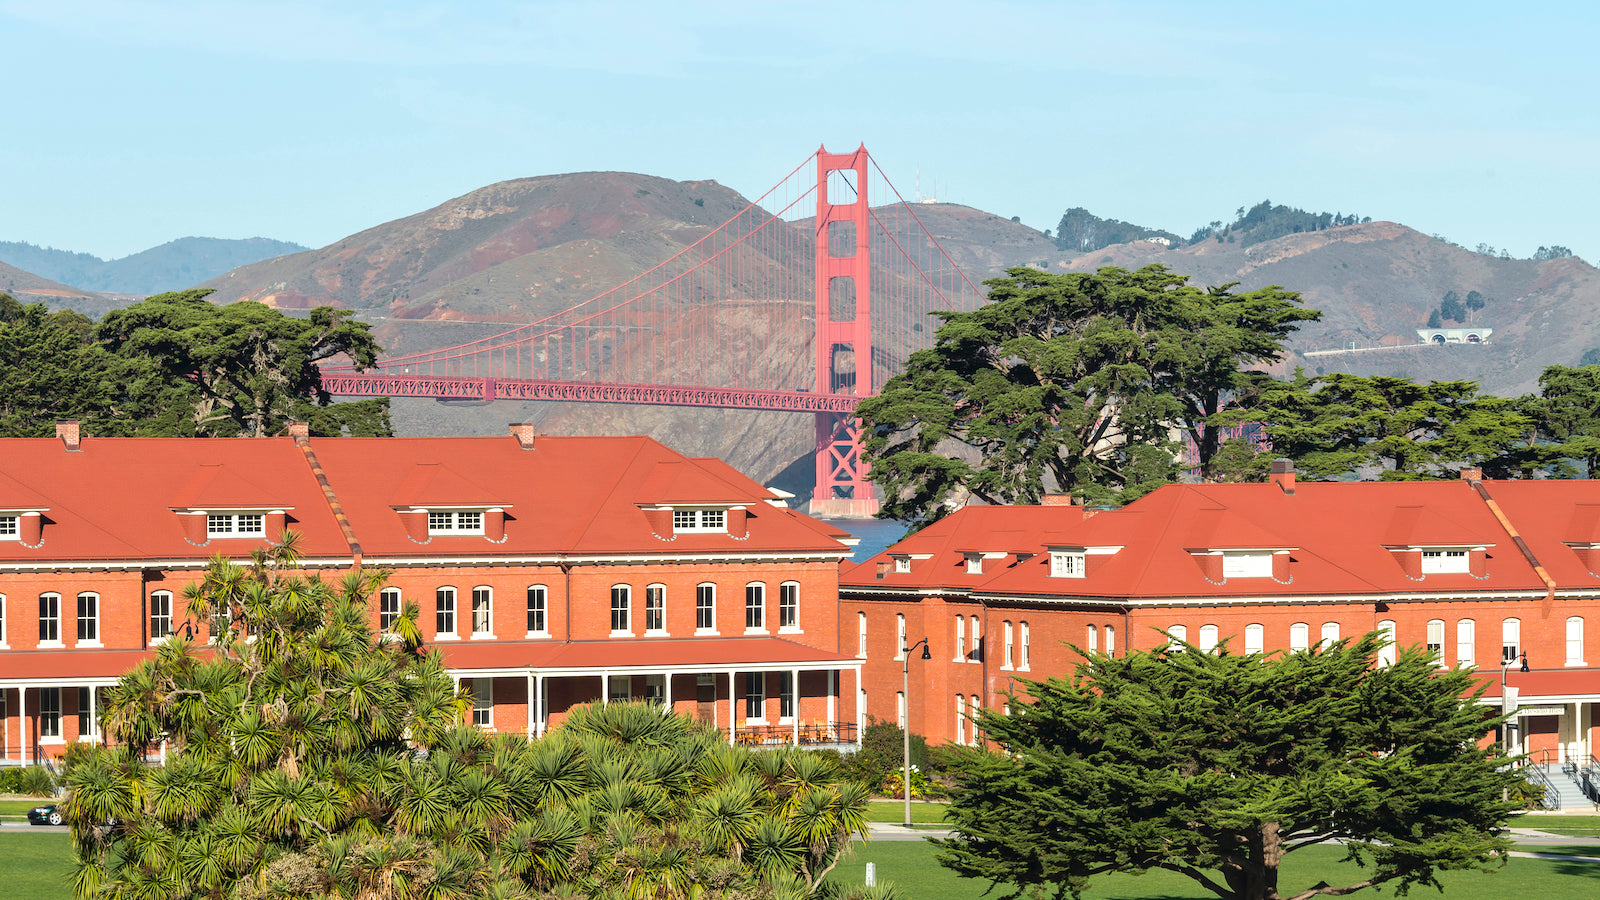 View of the Presidio of San Francisco on a sunny day, looking towards the Golden Gate Bridge. Red brick barracks with white trim are clustered among lush green trees.